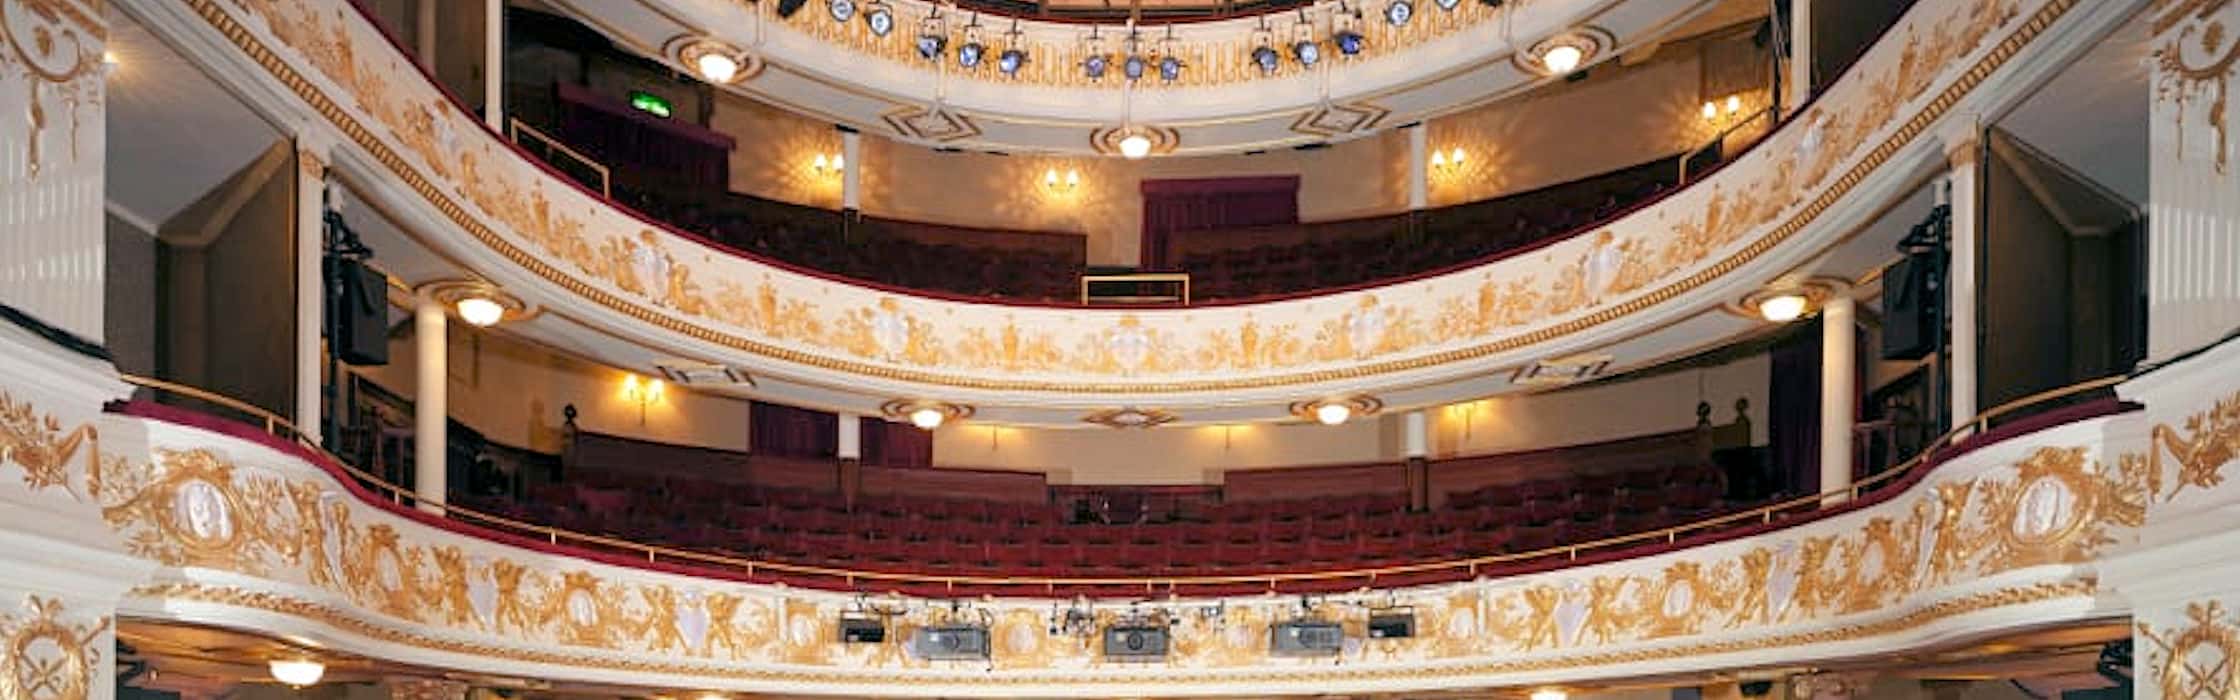 What's On at The Garrick Theatre, London